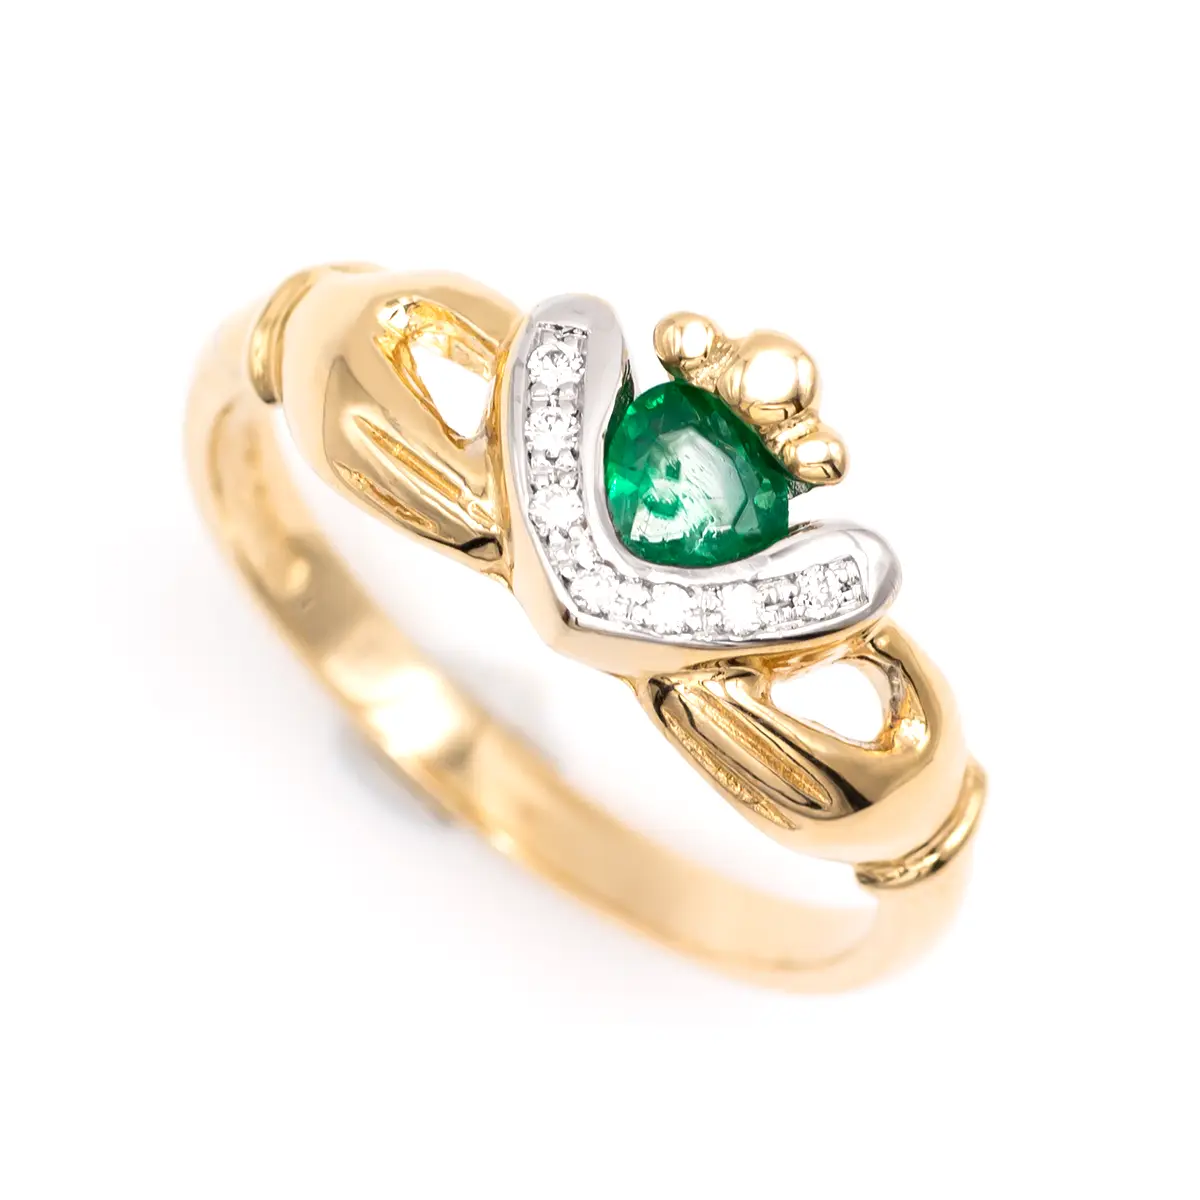 Ladies 14k Gold Claddagh Ring with Emerald and Diamonds